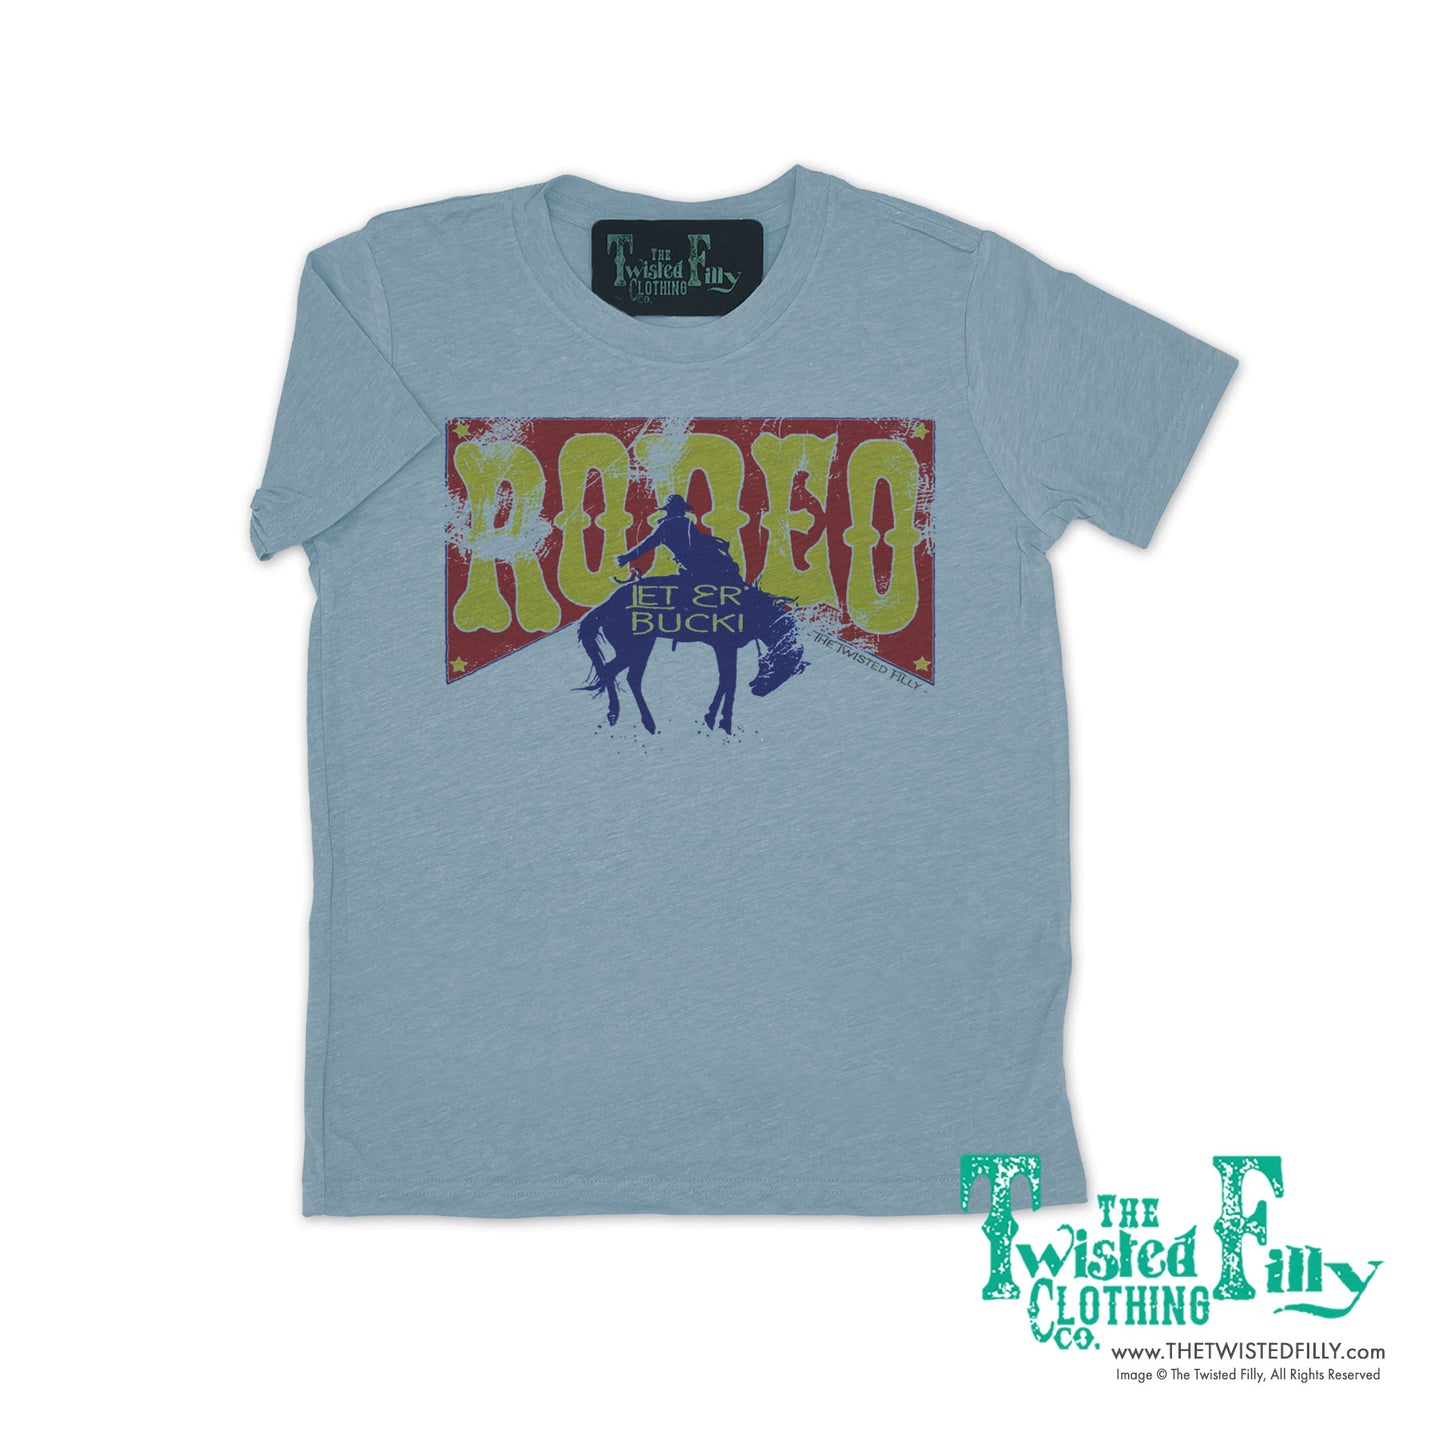 Rodeo - S/S Infant Tee - Assorted Colors